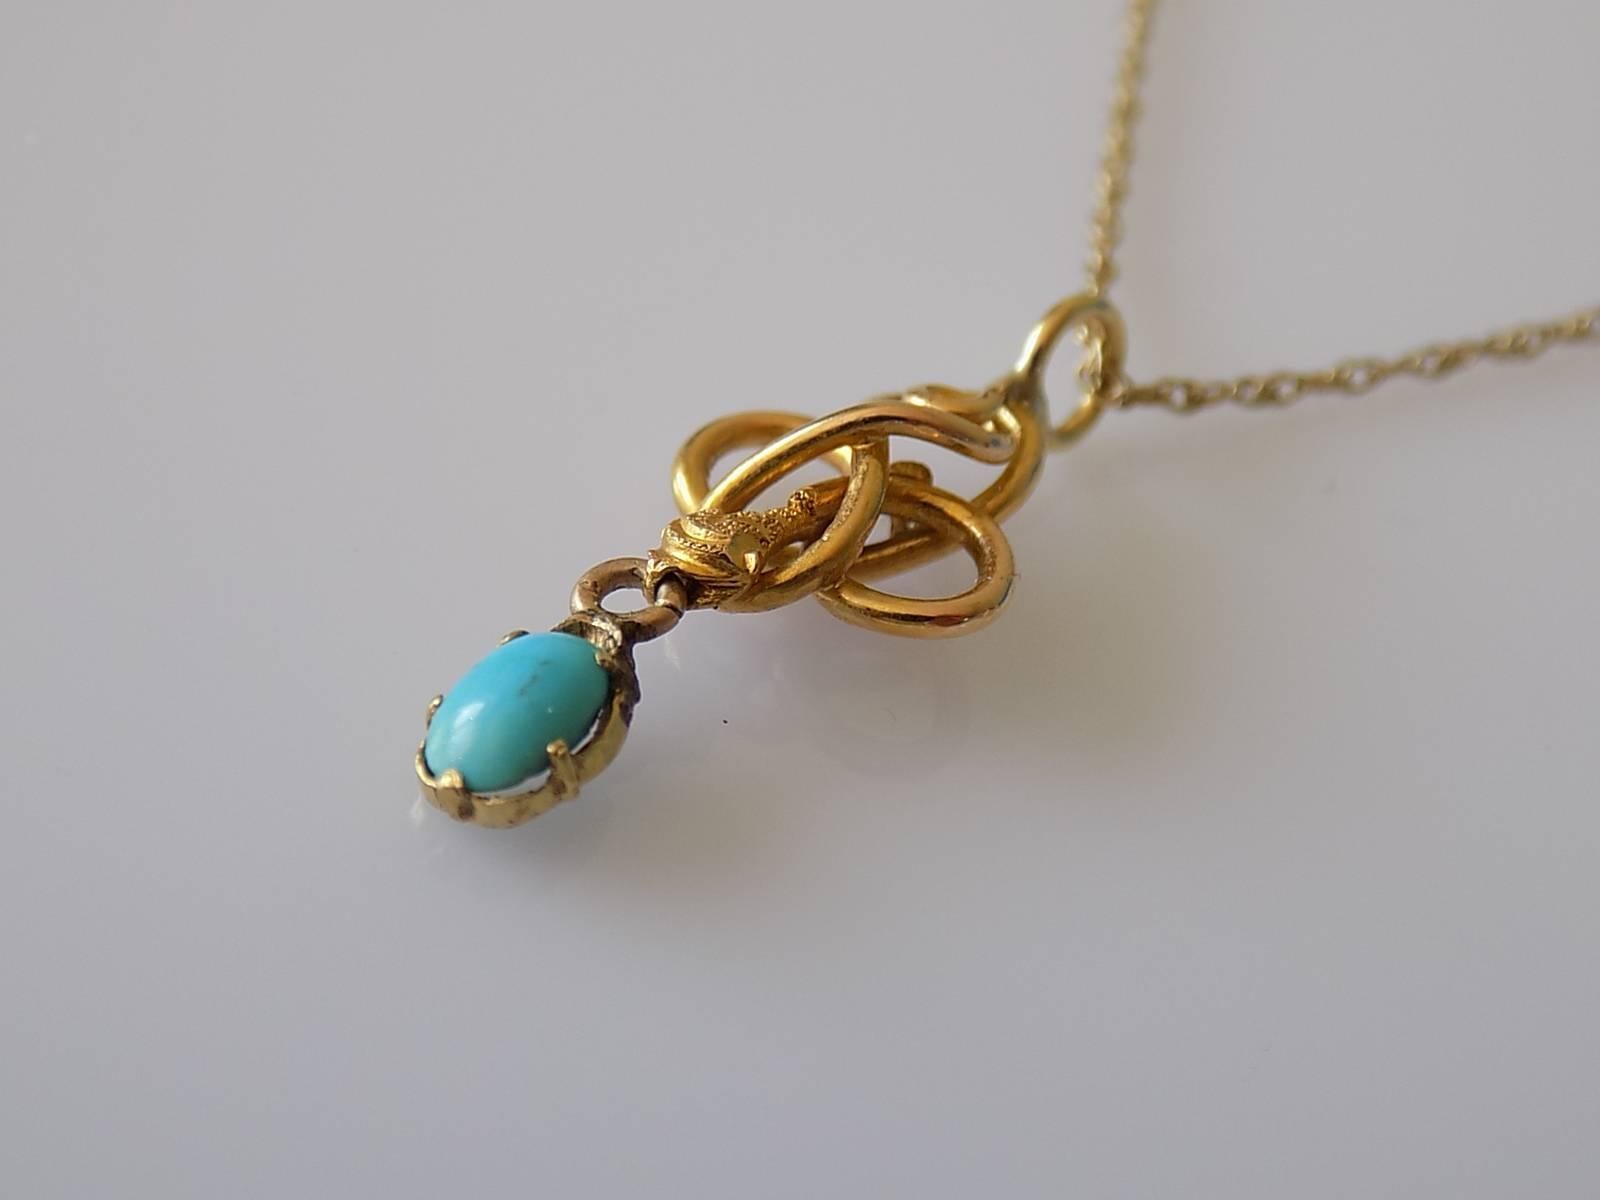 A Lovely Victorian c.1880 18 Carat Gold and Turquoise Snake stick pin conversion pendant on 9 Carat Gold chain.
Drop 25mm (1